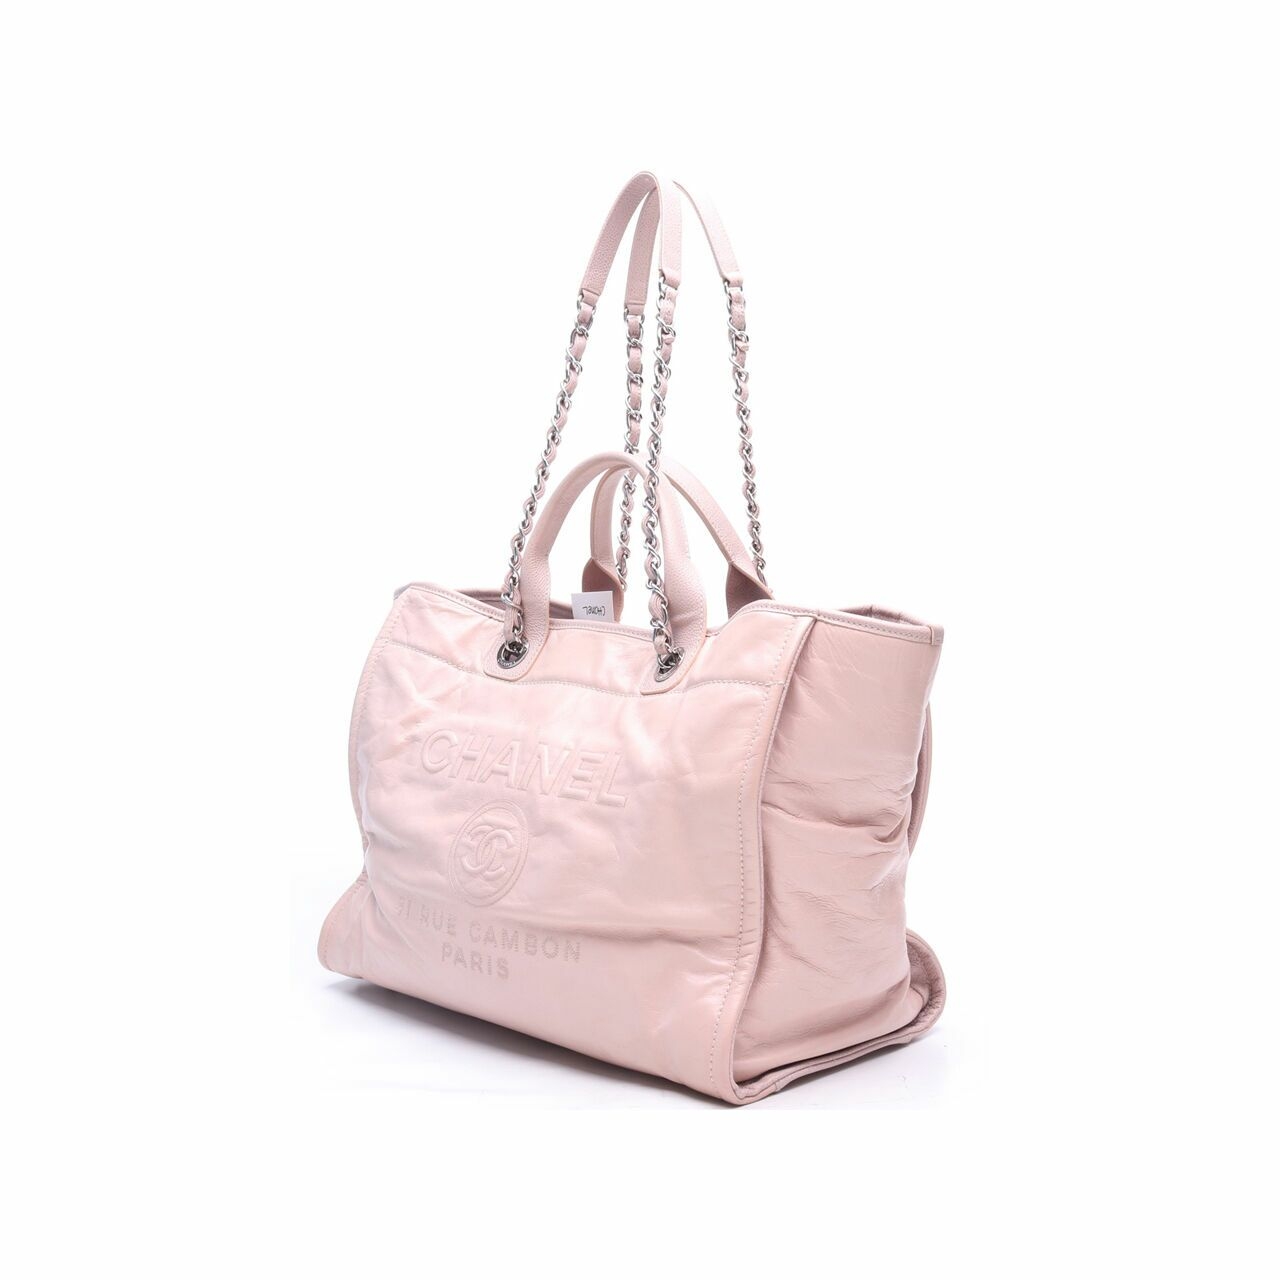 Chanel Deauville Pink Large Tote Bag 